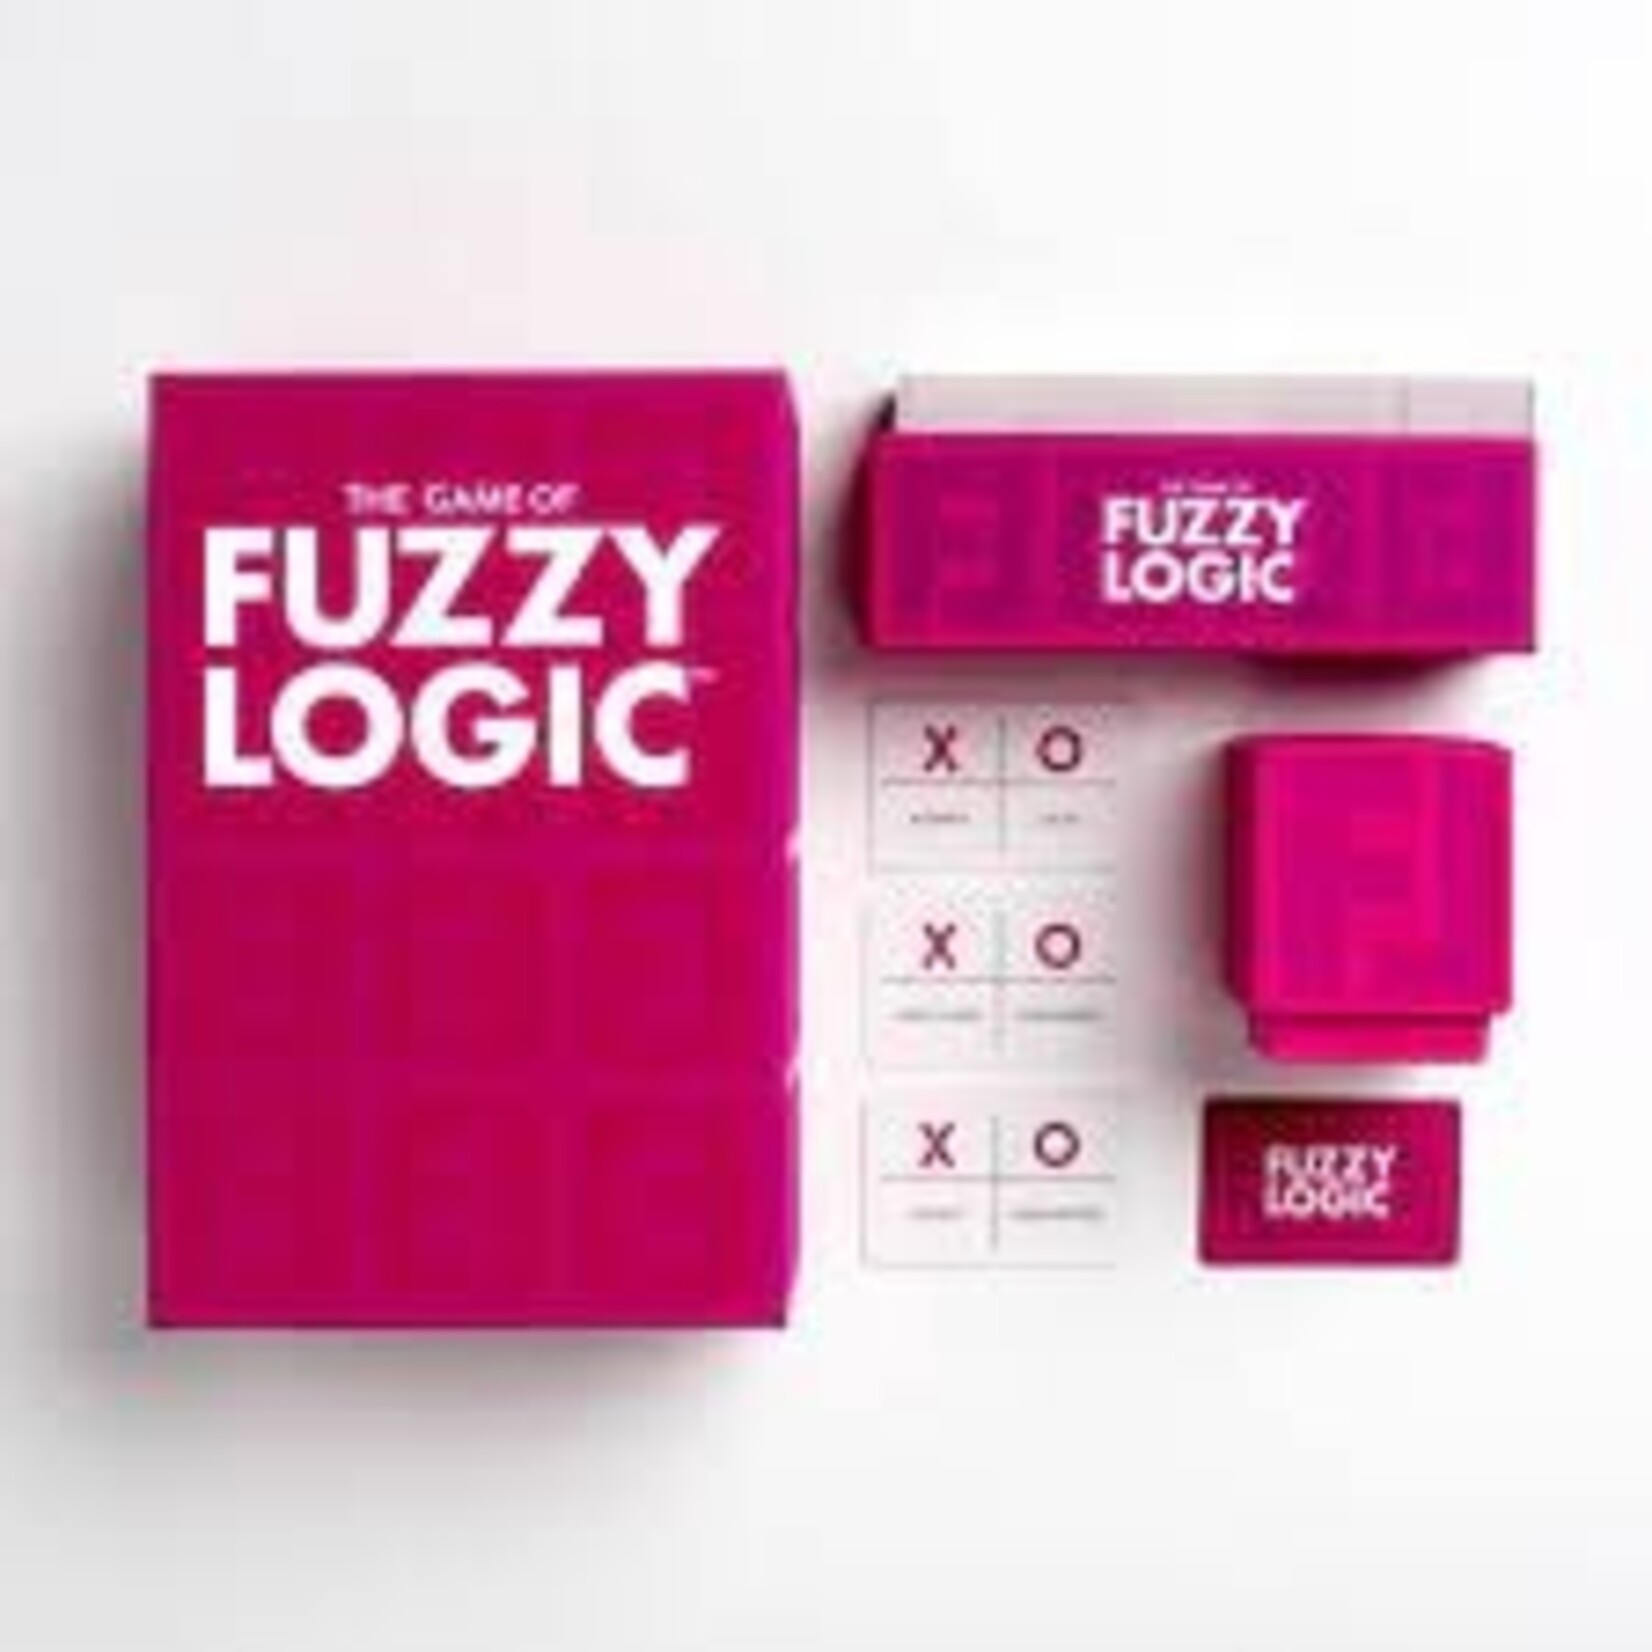 The Good Game Co Fuzzy Logic